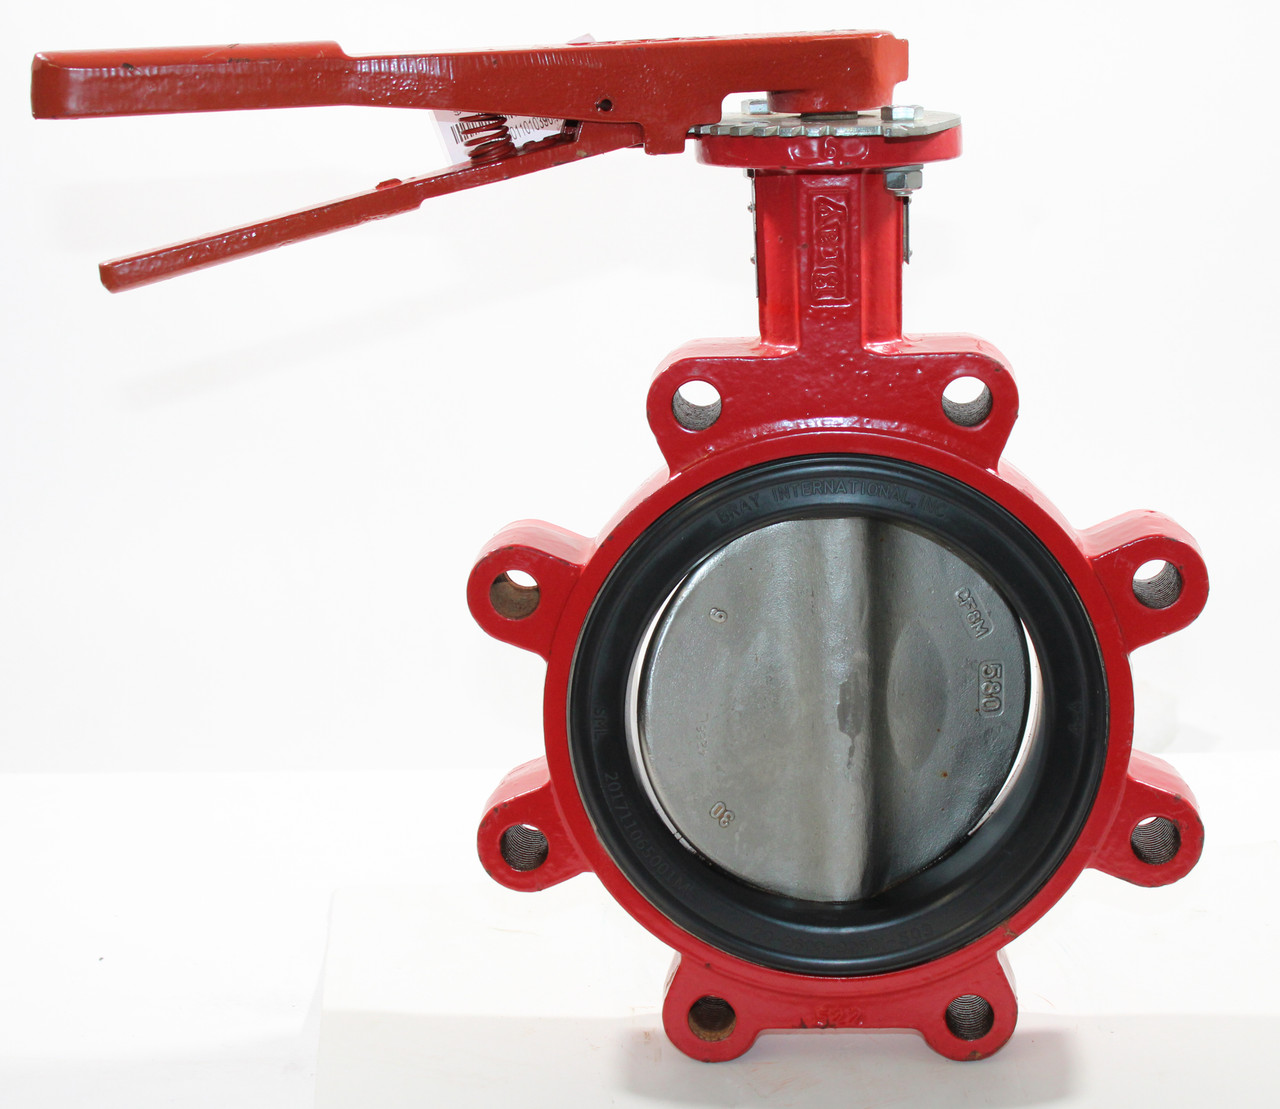 Bray 310600-11010390 Butterfly Valve Resilient Seated 6"